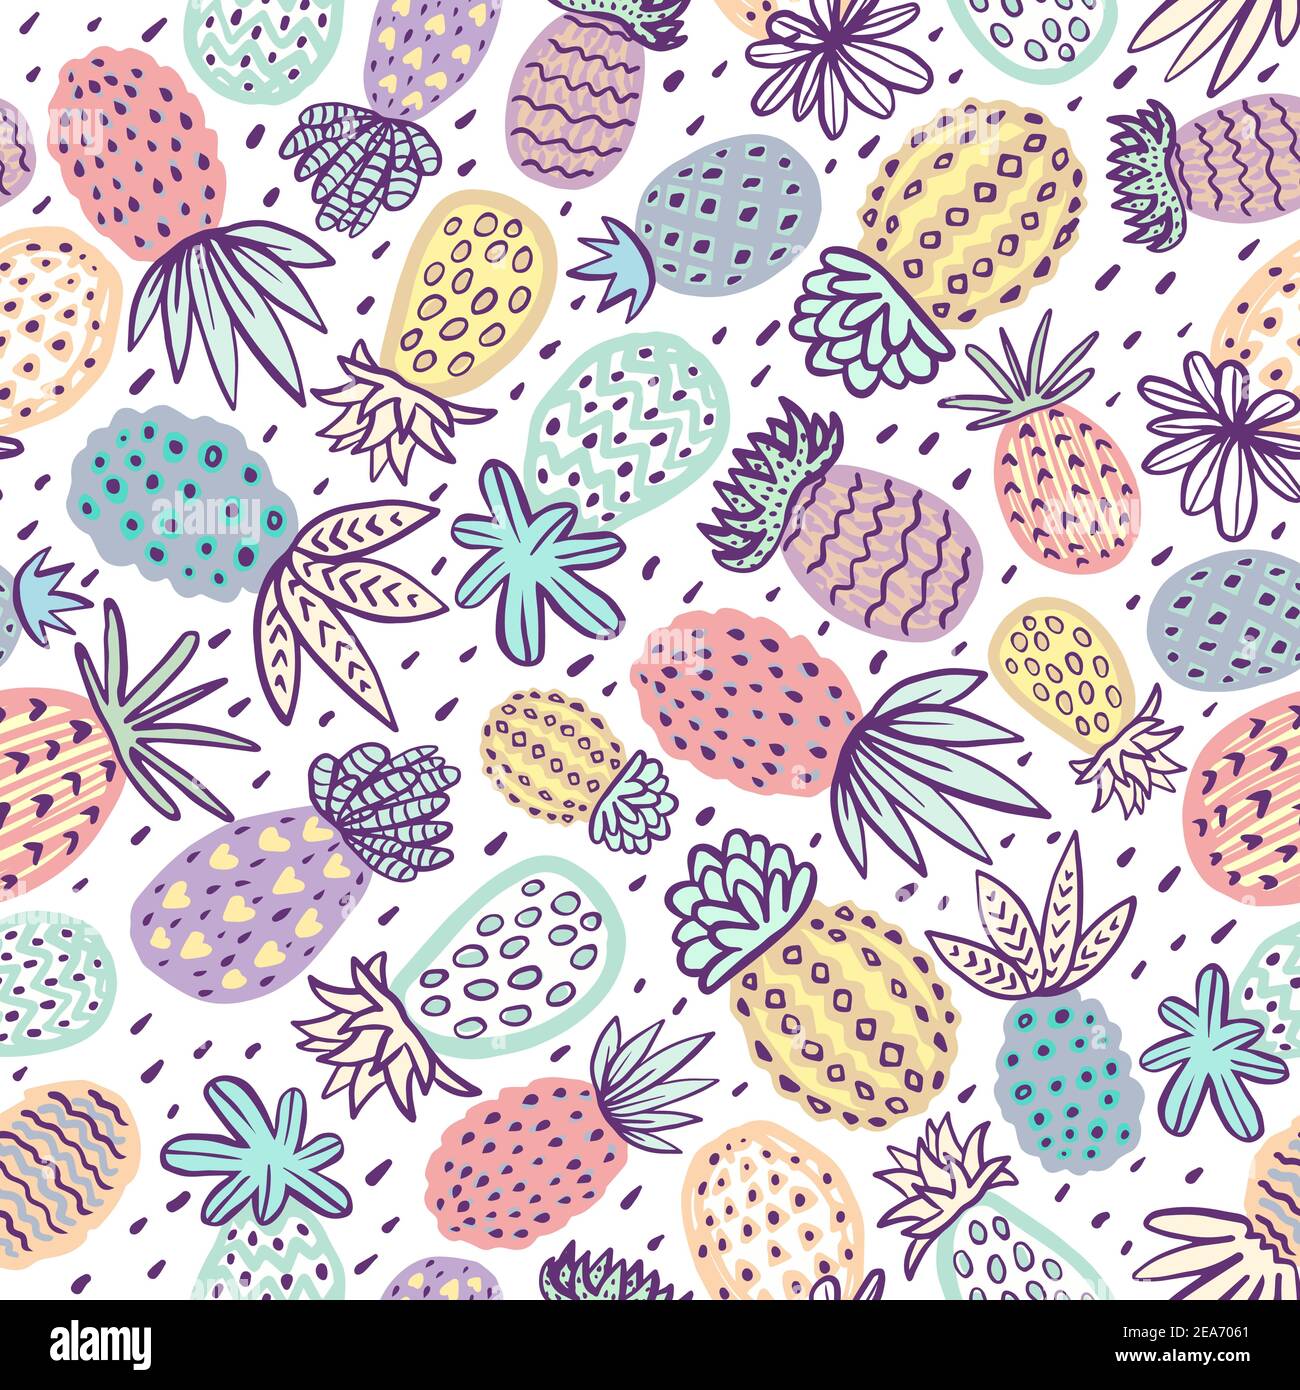 Seamless pineapple pattern. Handdrawn Pinapple with different textures in pastel colors. Exotic fruits background For Fashion print, textile, fabric Stock Vector